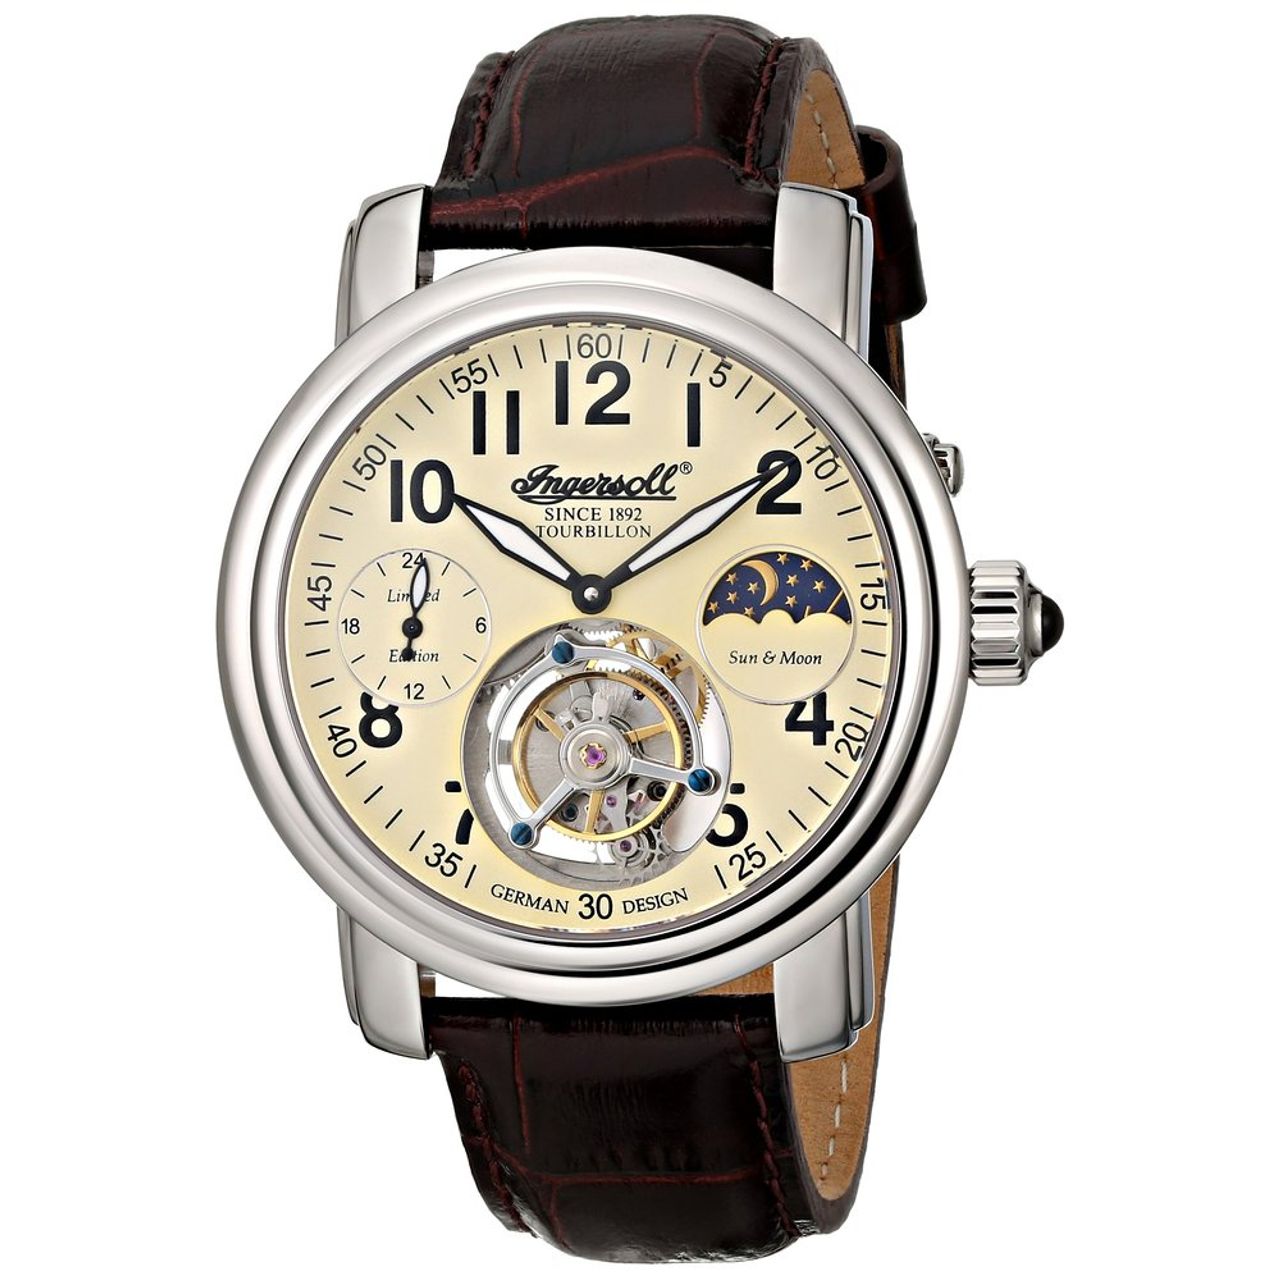 Ingersoll IN5306CR Mens Beige Dial Analog Mechanical Watch with Leather Strap